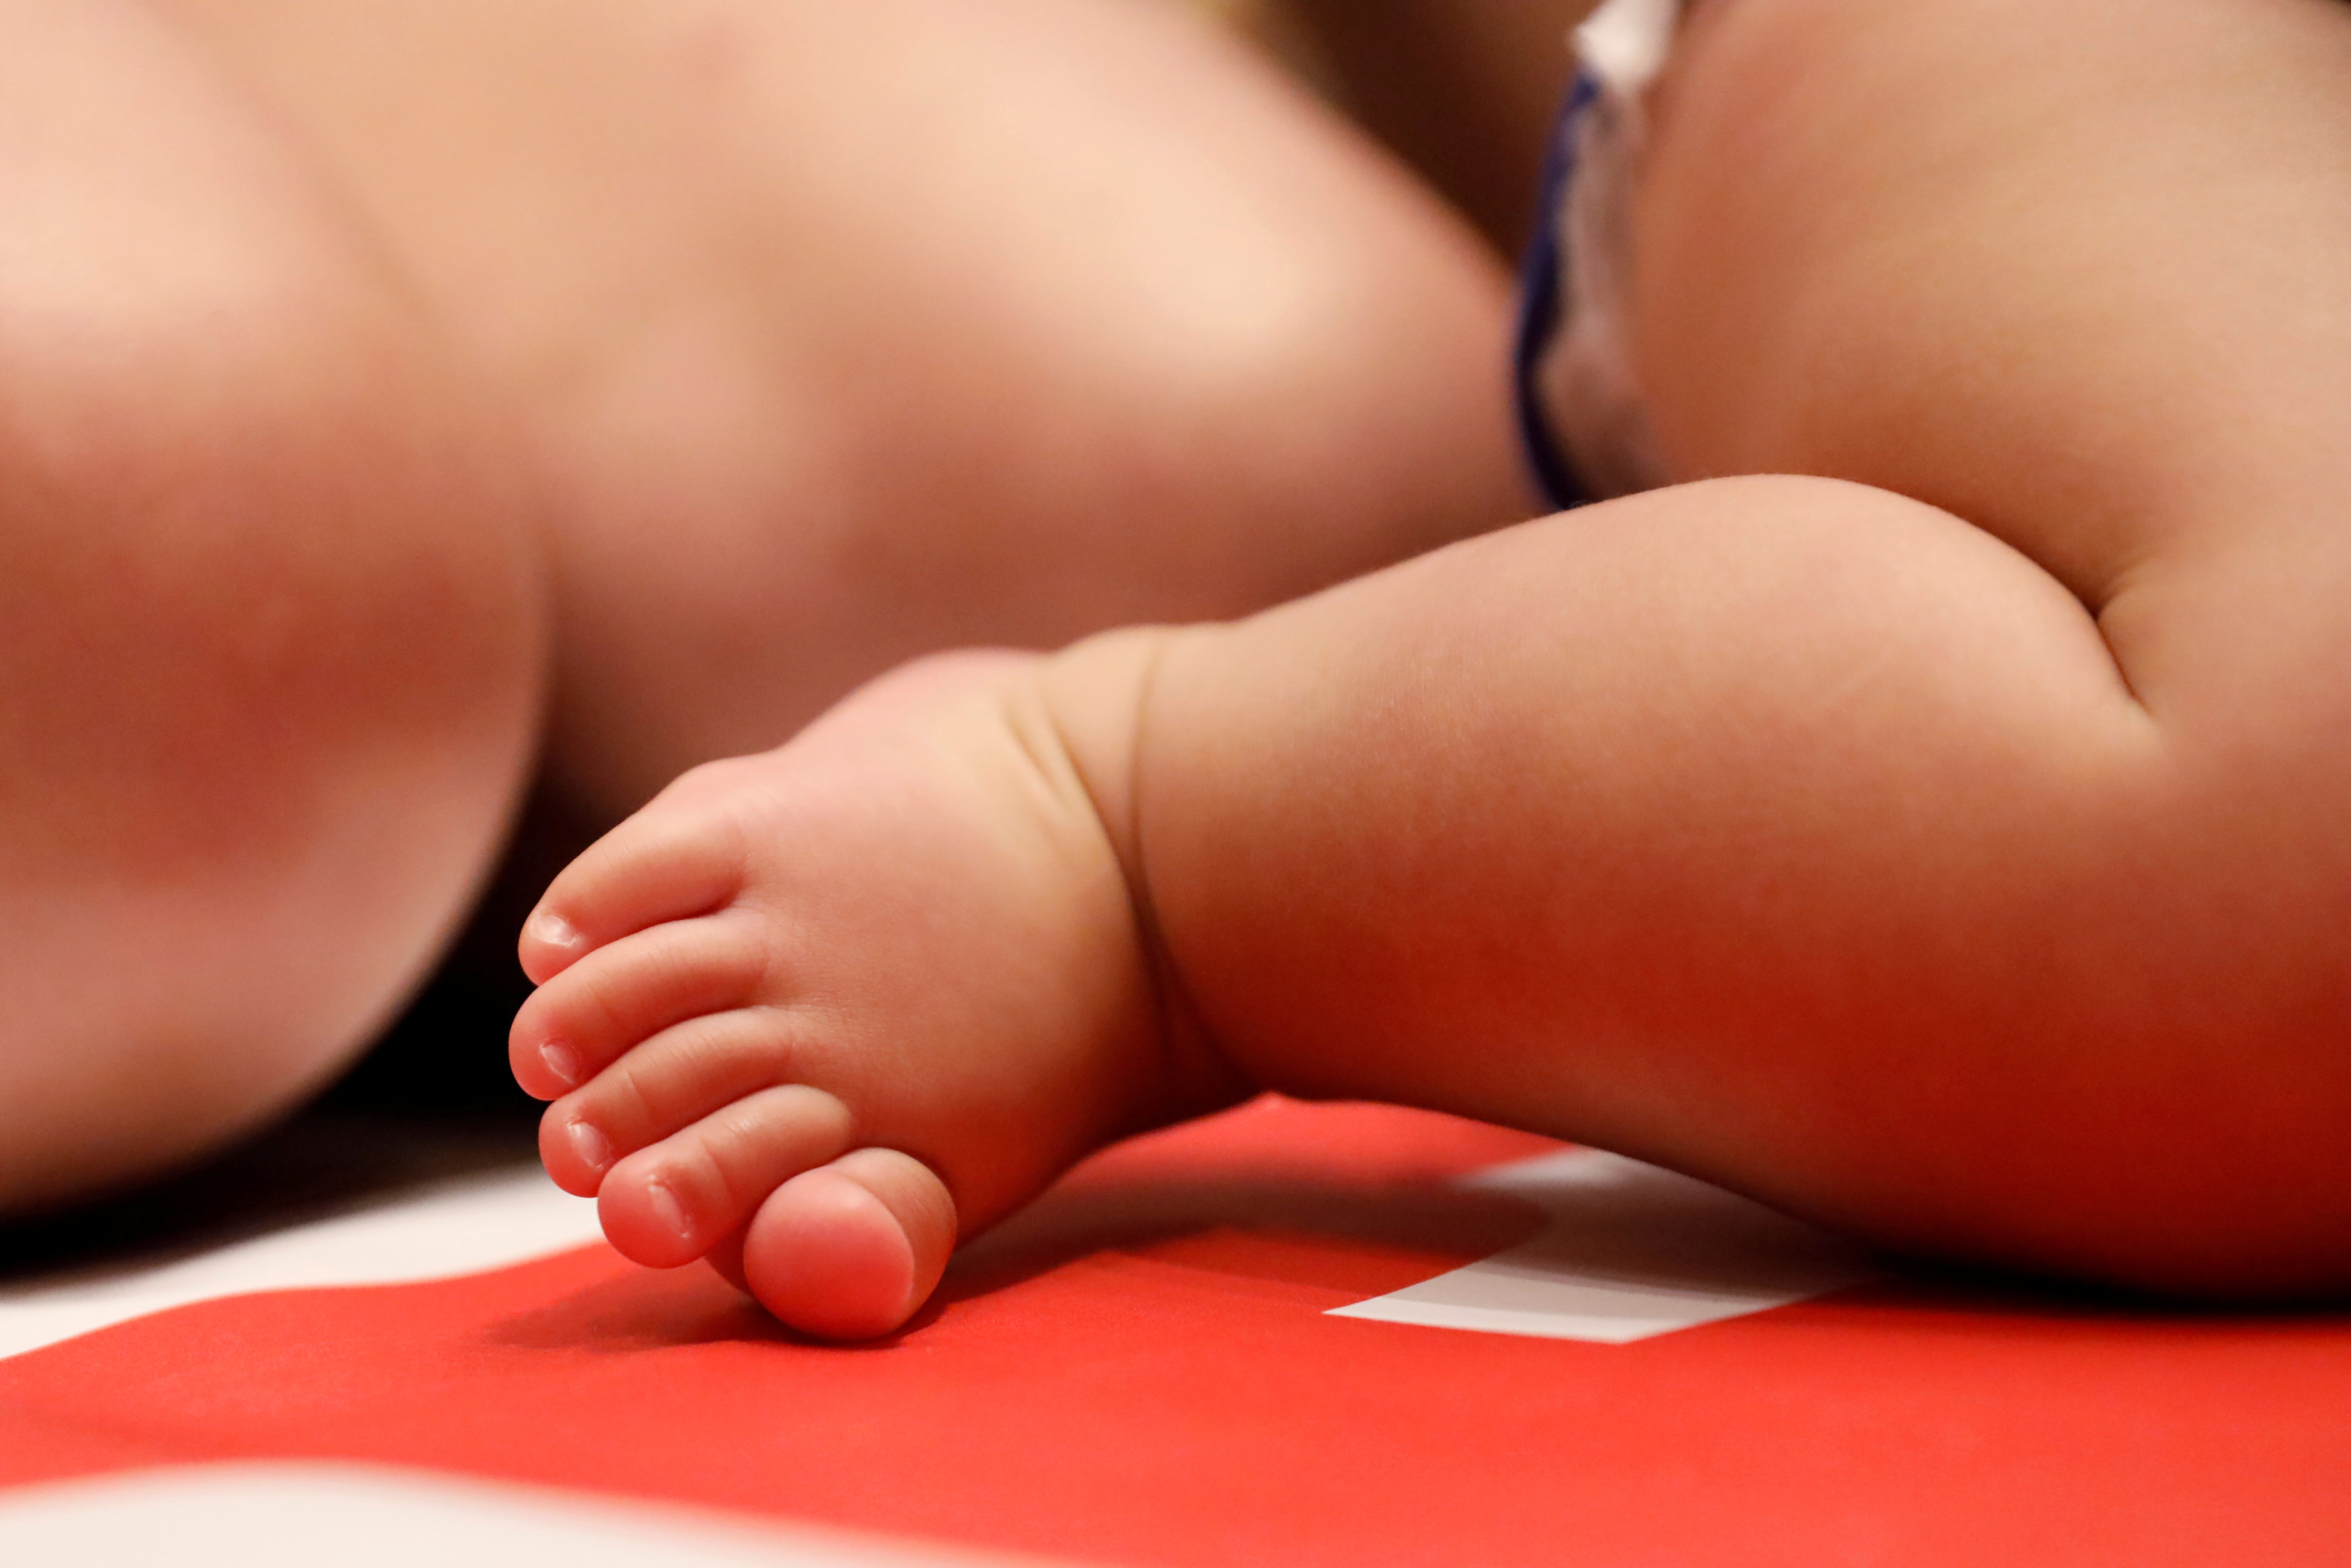 The foot of a baby next to their mum (by Reuters)